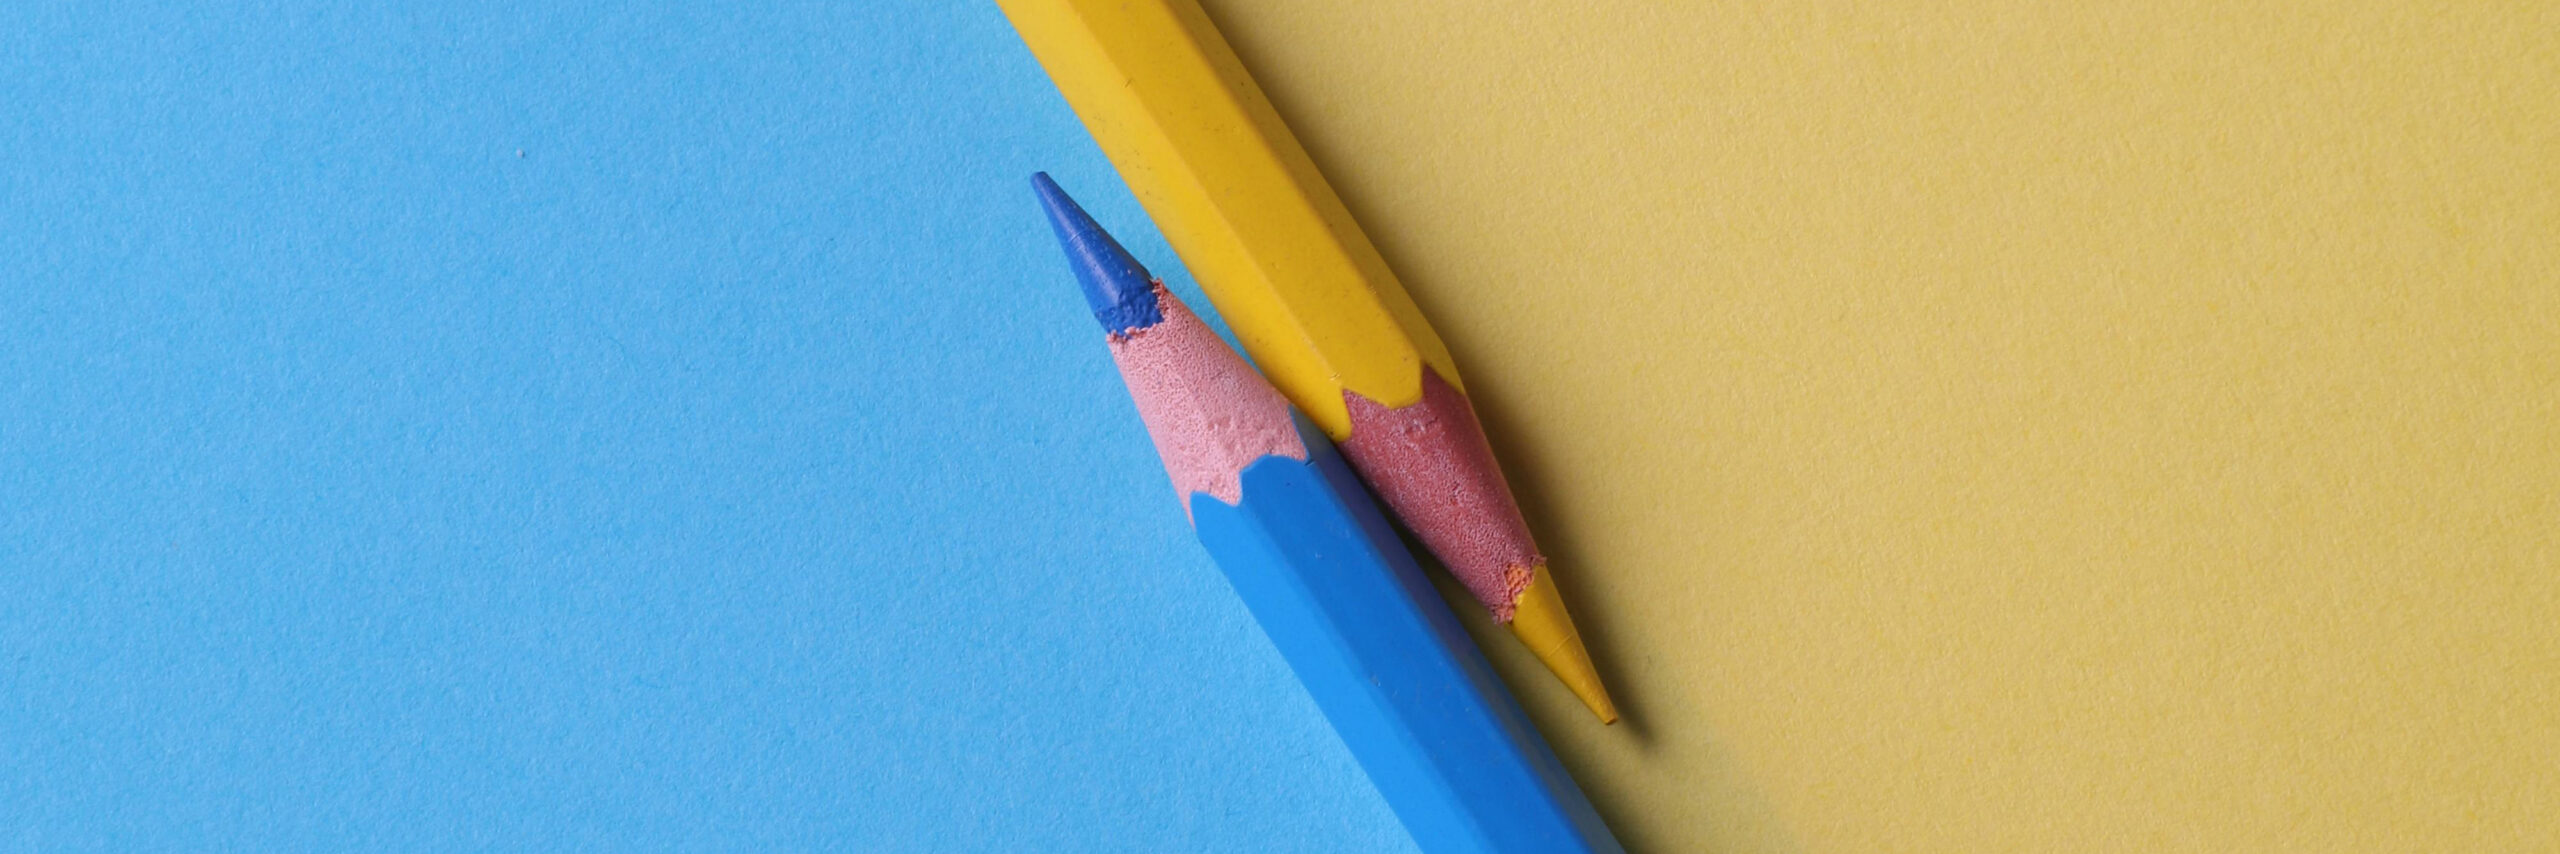 Colorful blue and yellow pencils BANNER